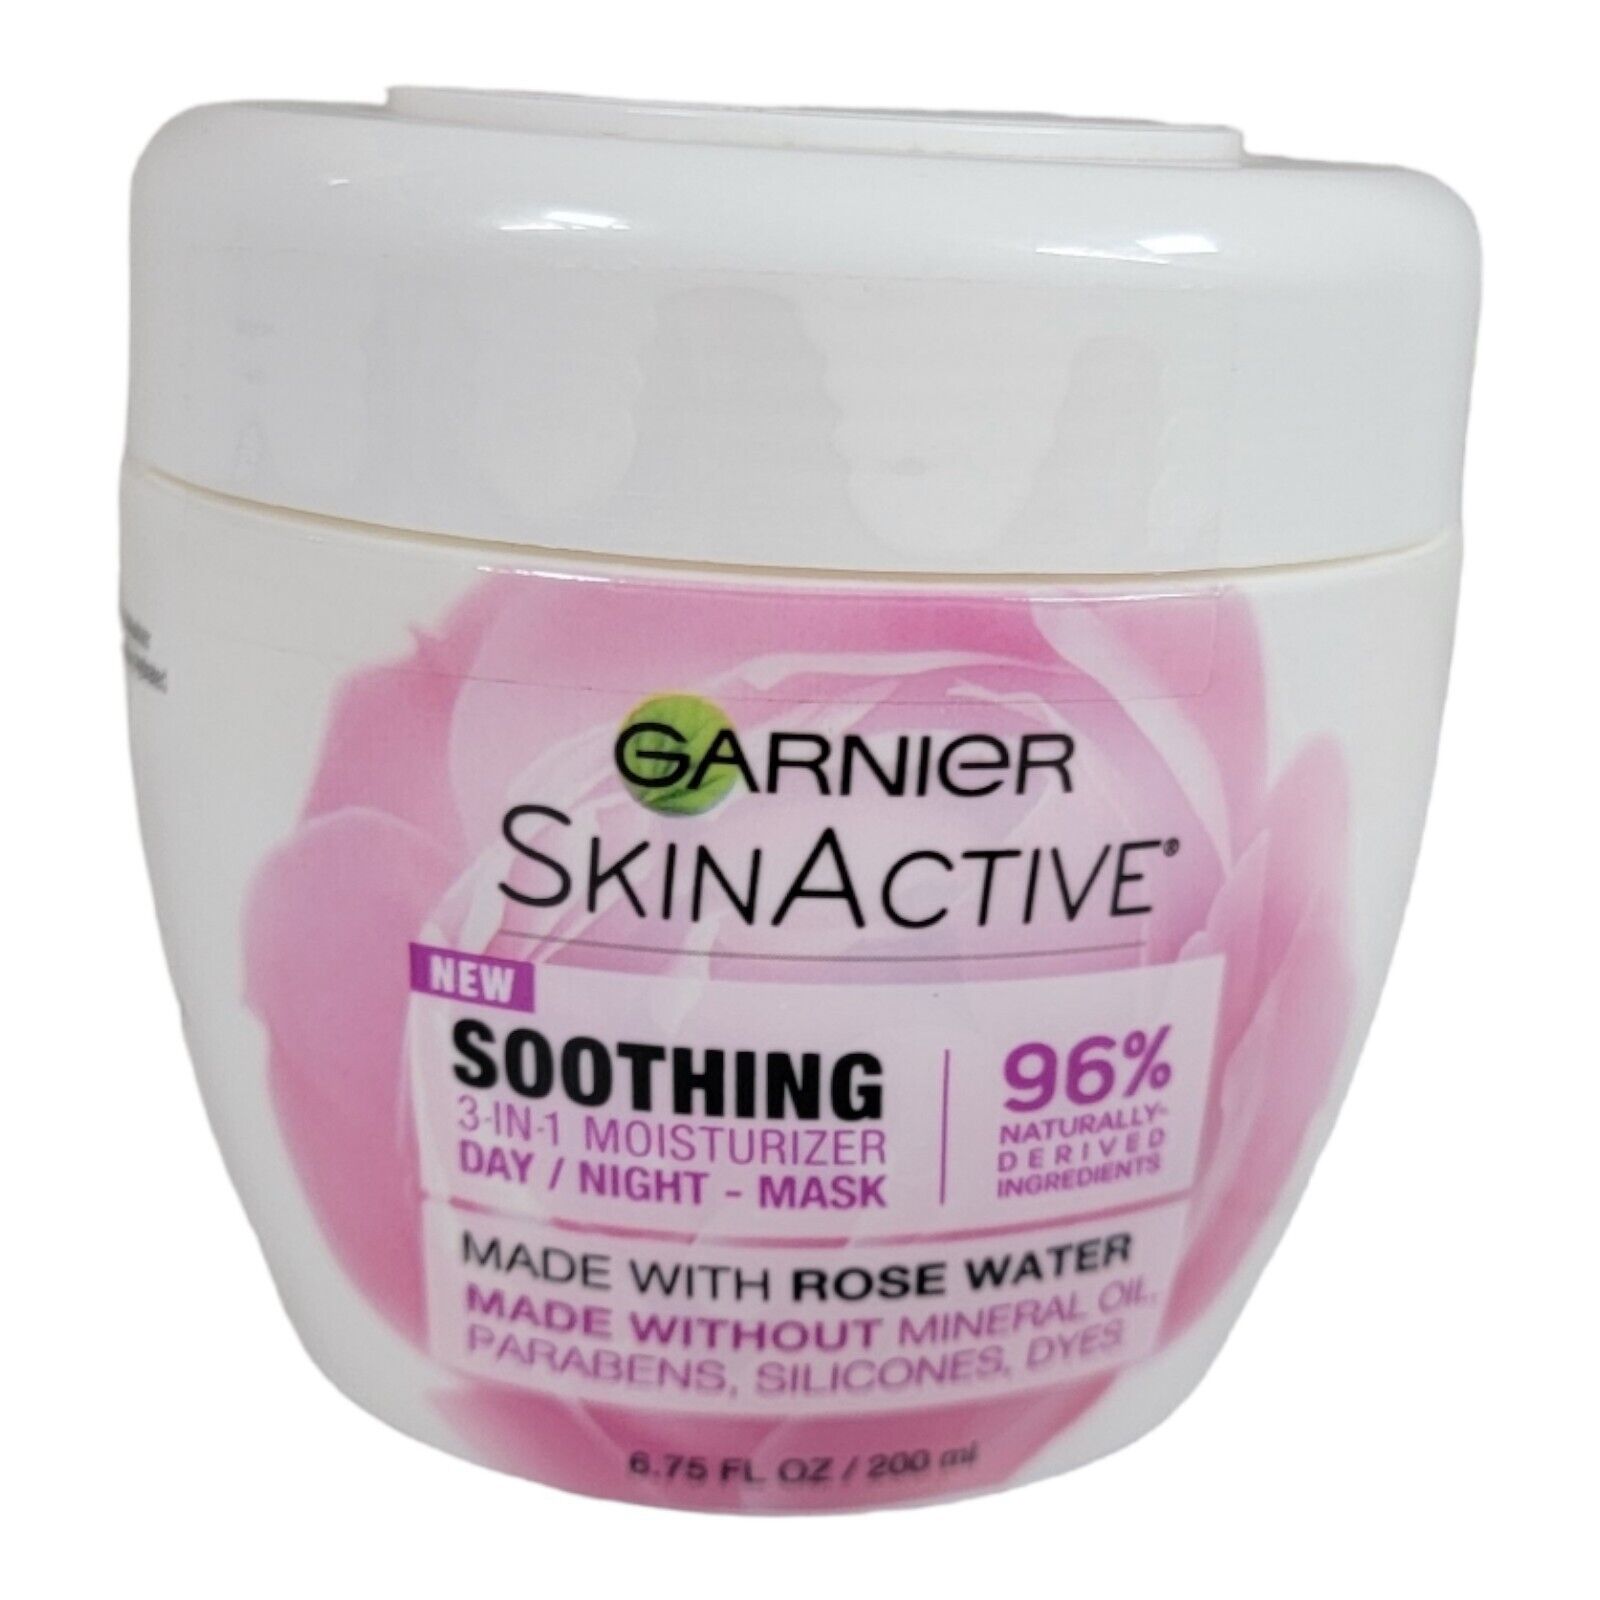 Primary image for Garnier SkinActive Soothing 3IN1 Moisturizer Day/Night Mask 6.75oz